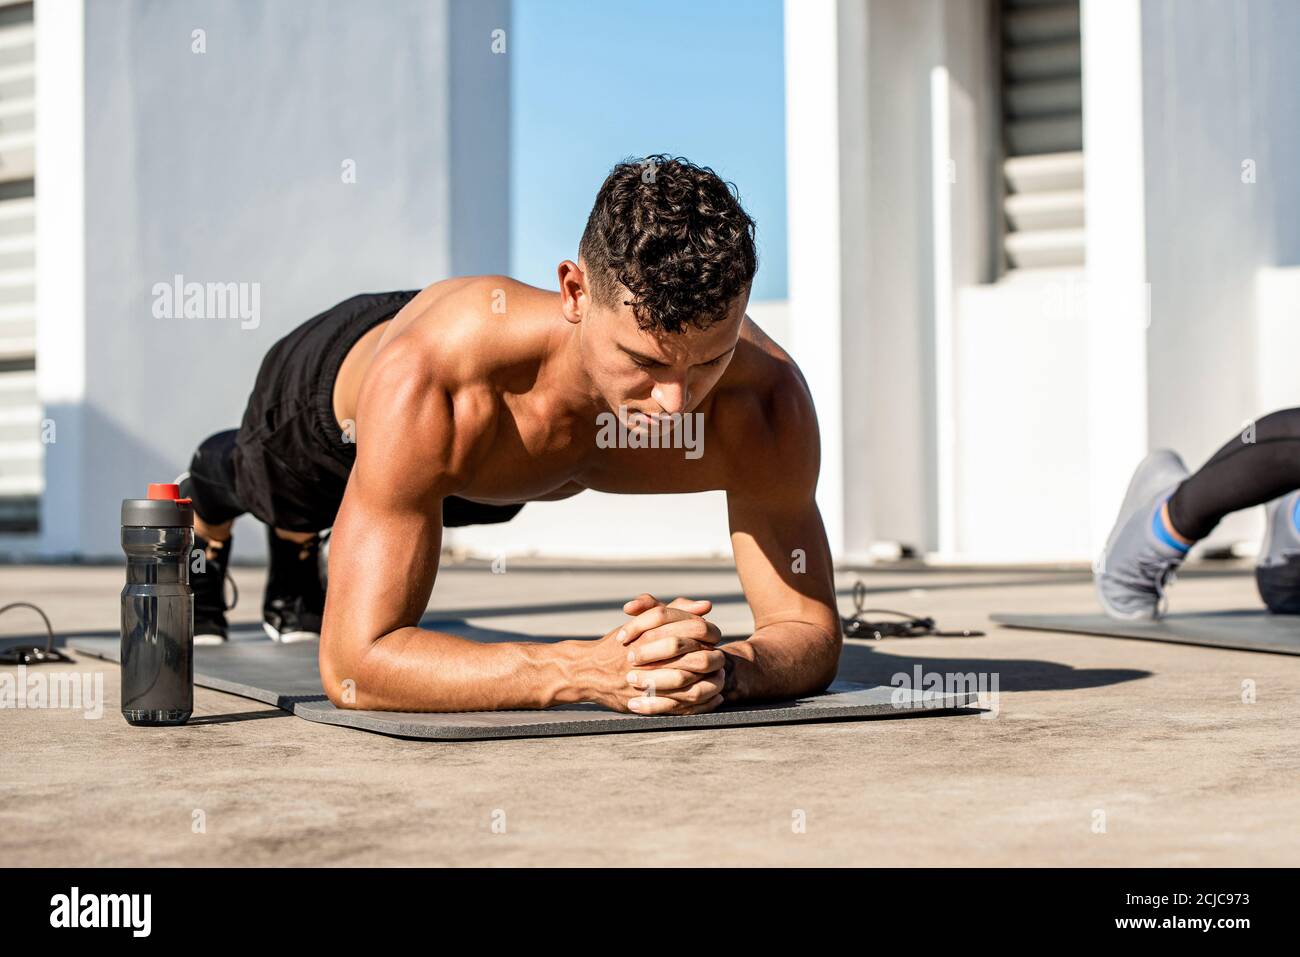 Muscular sports man doing plank exercise in the open air on building rooftop Stock Photo